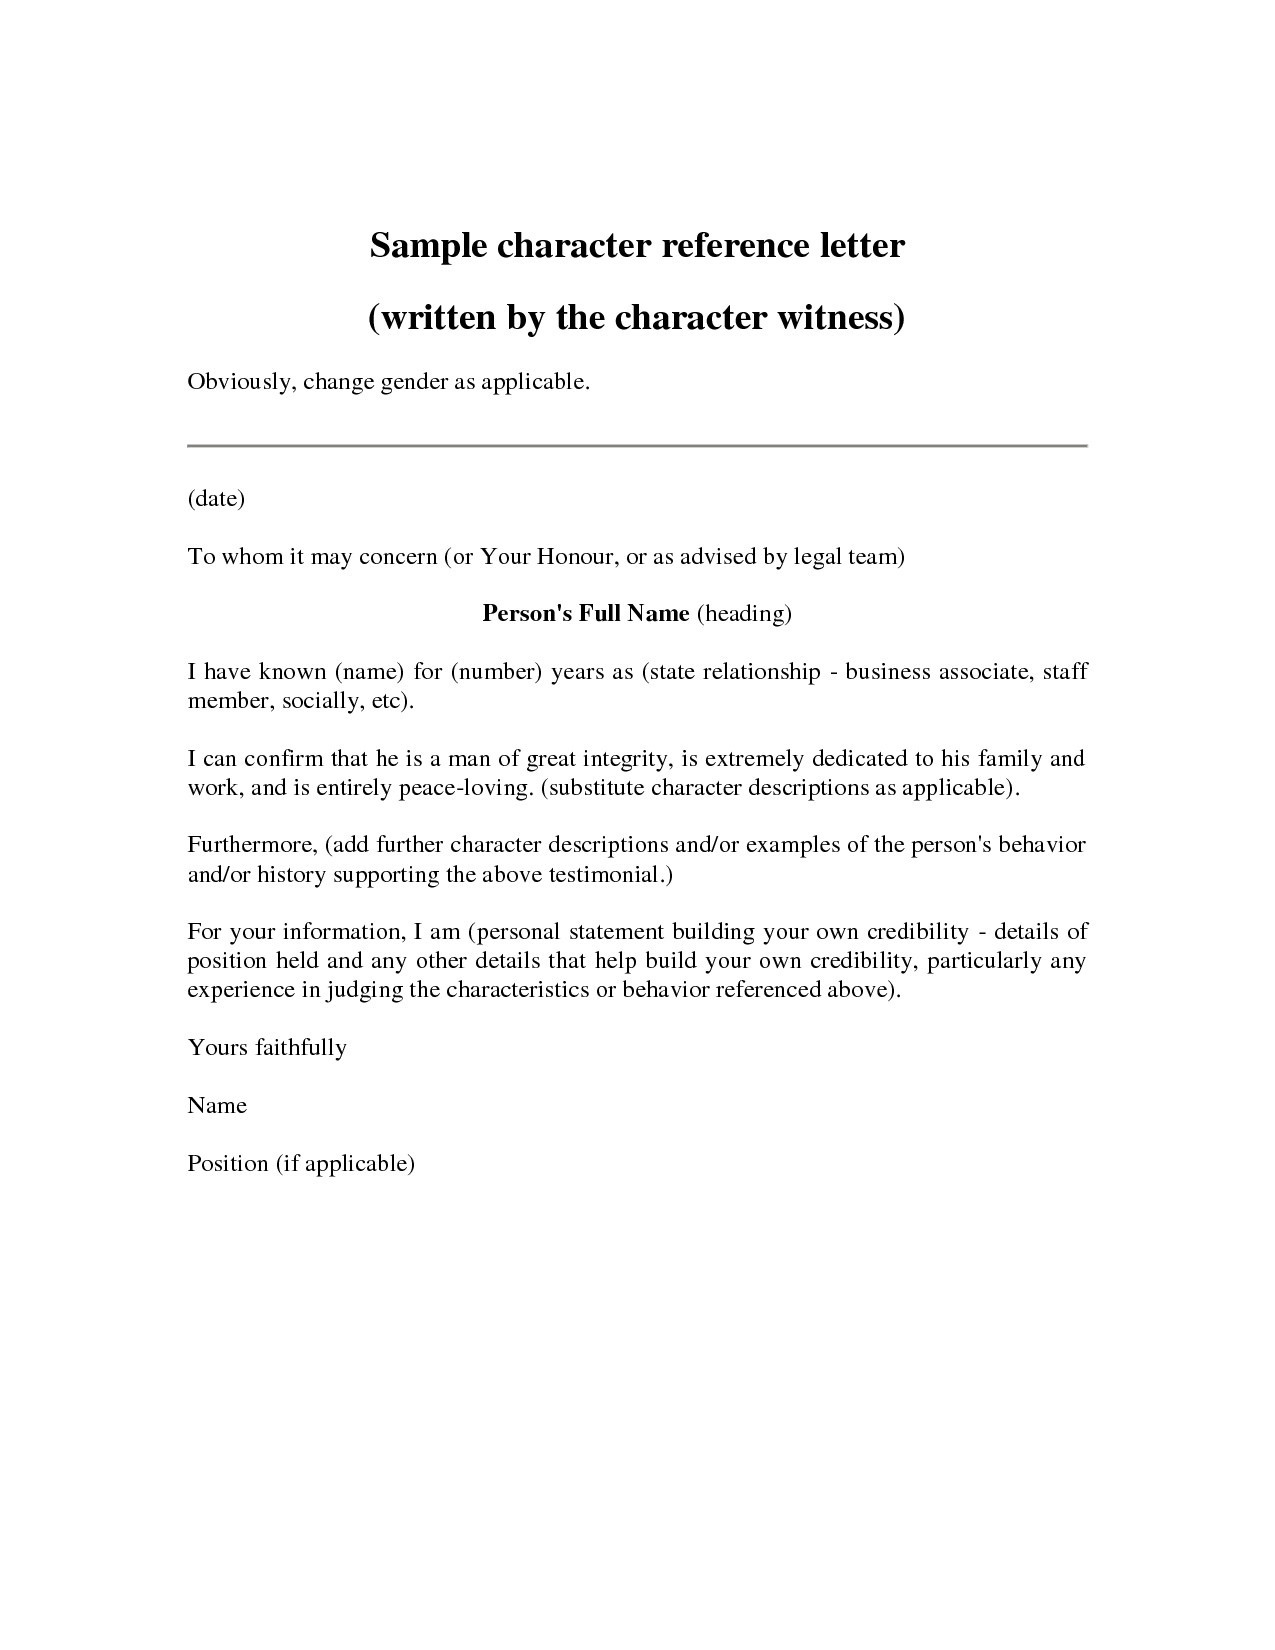 immigration reference letter template Collection-Letter Re mendation Template to whom It May Concern New Letter Re Mendation format Employment Copy 1-c